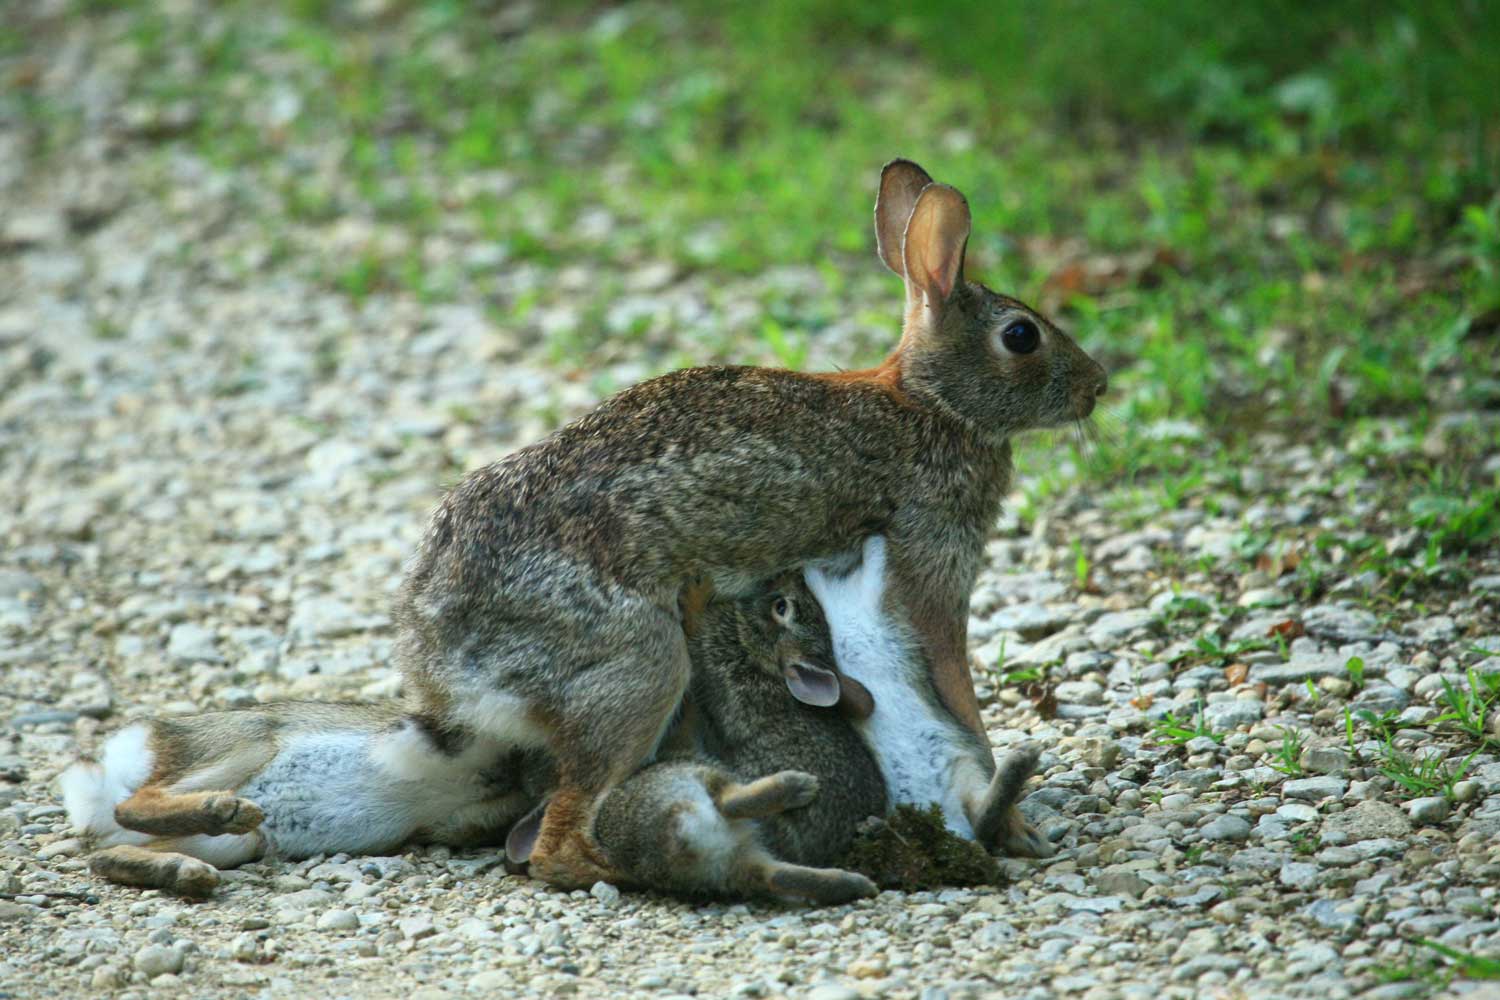 Breeding like rabbits? What does that mean anyway? Forest Preserve District of Will County image photo